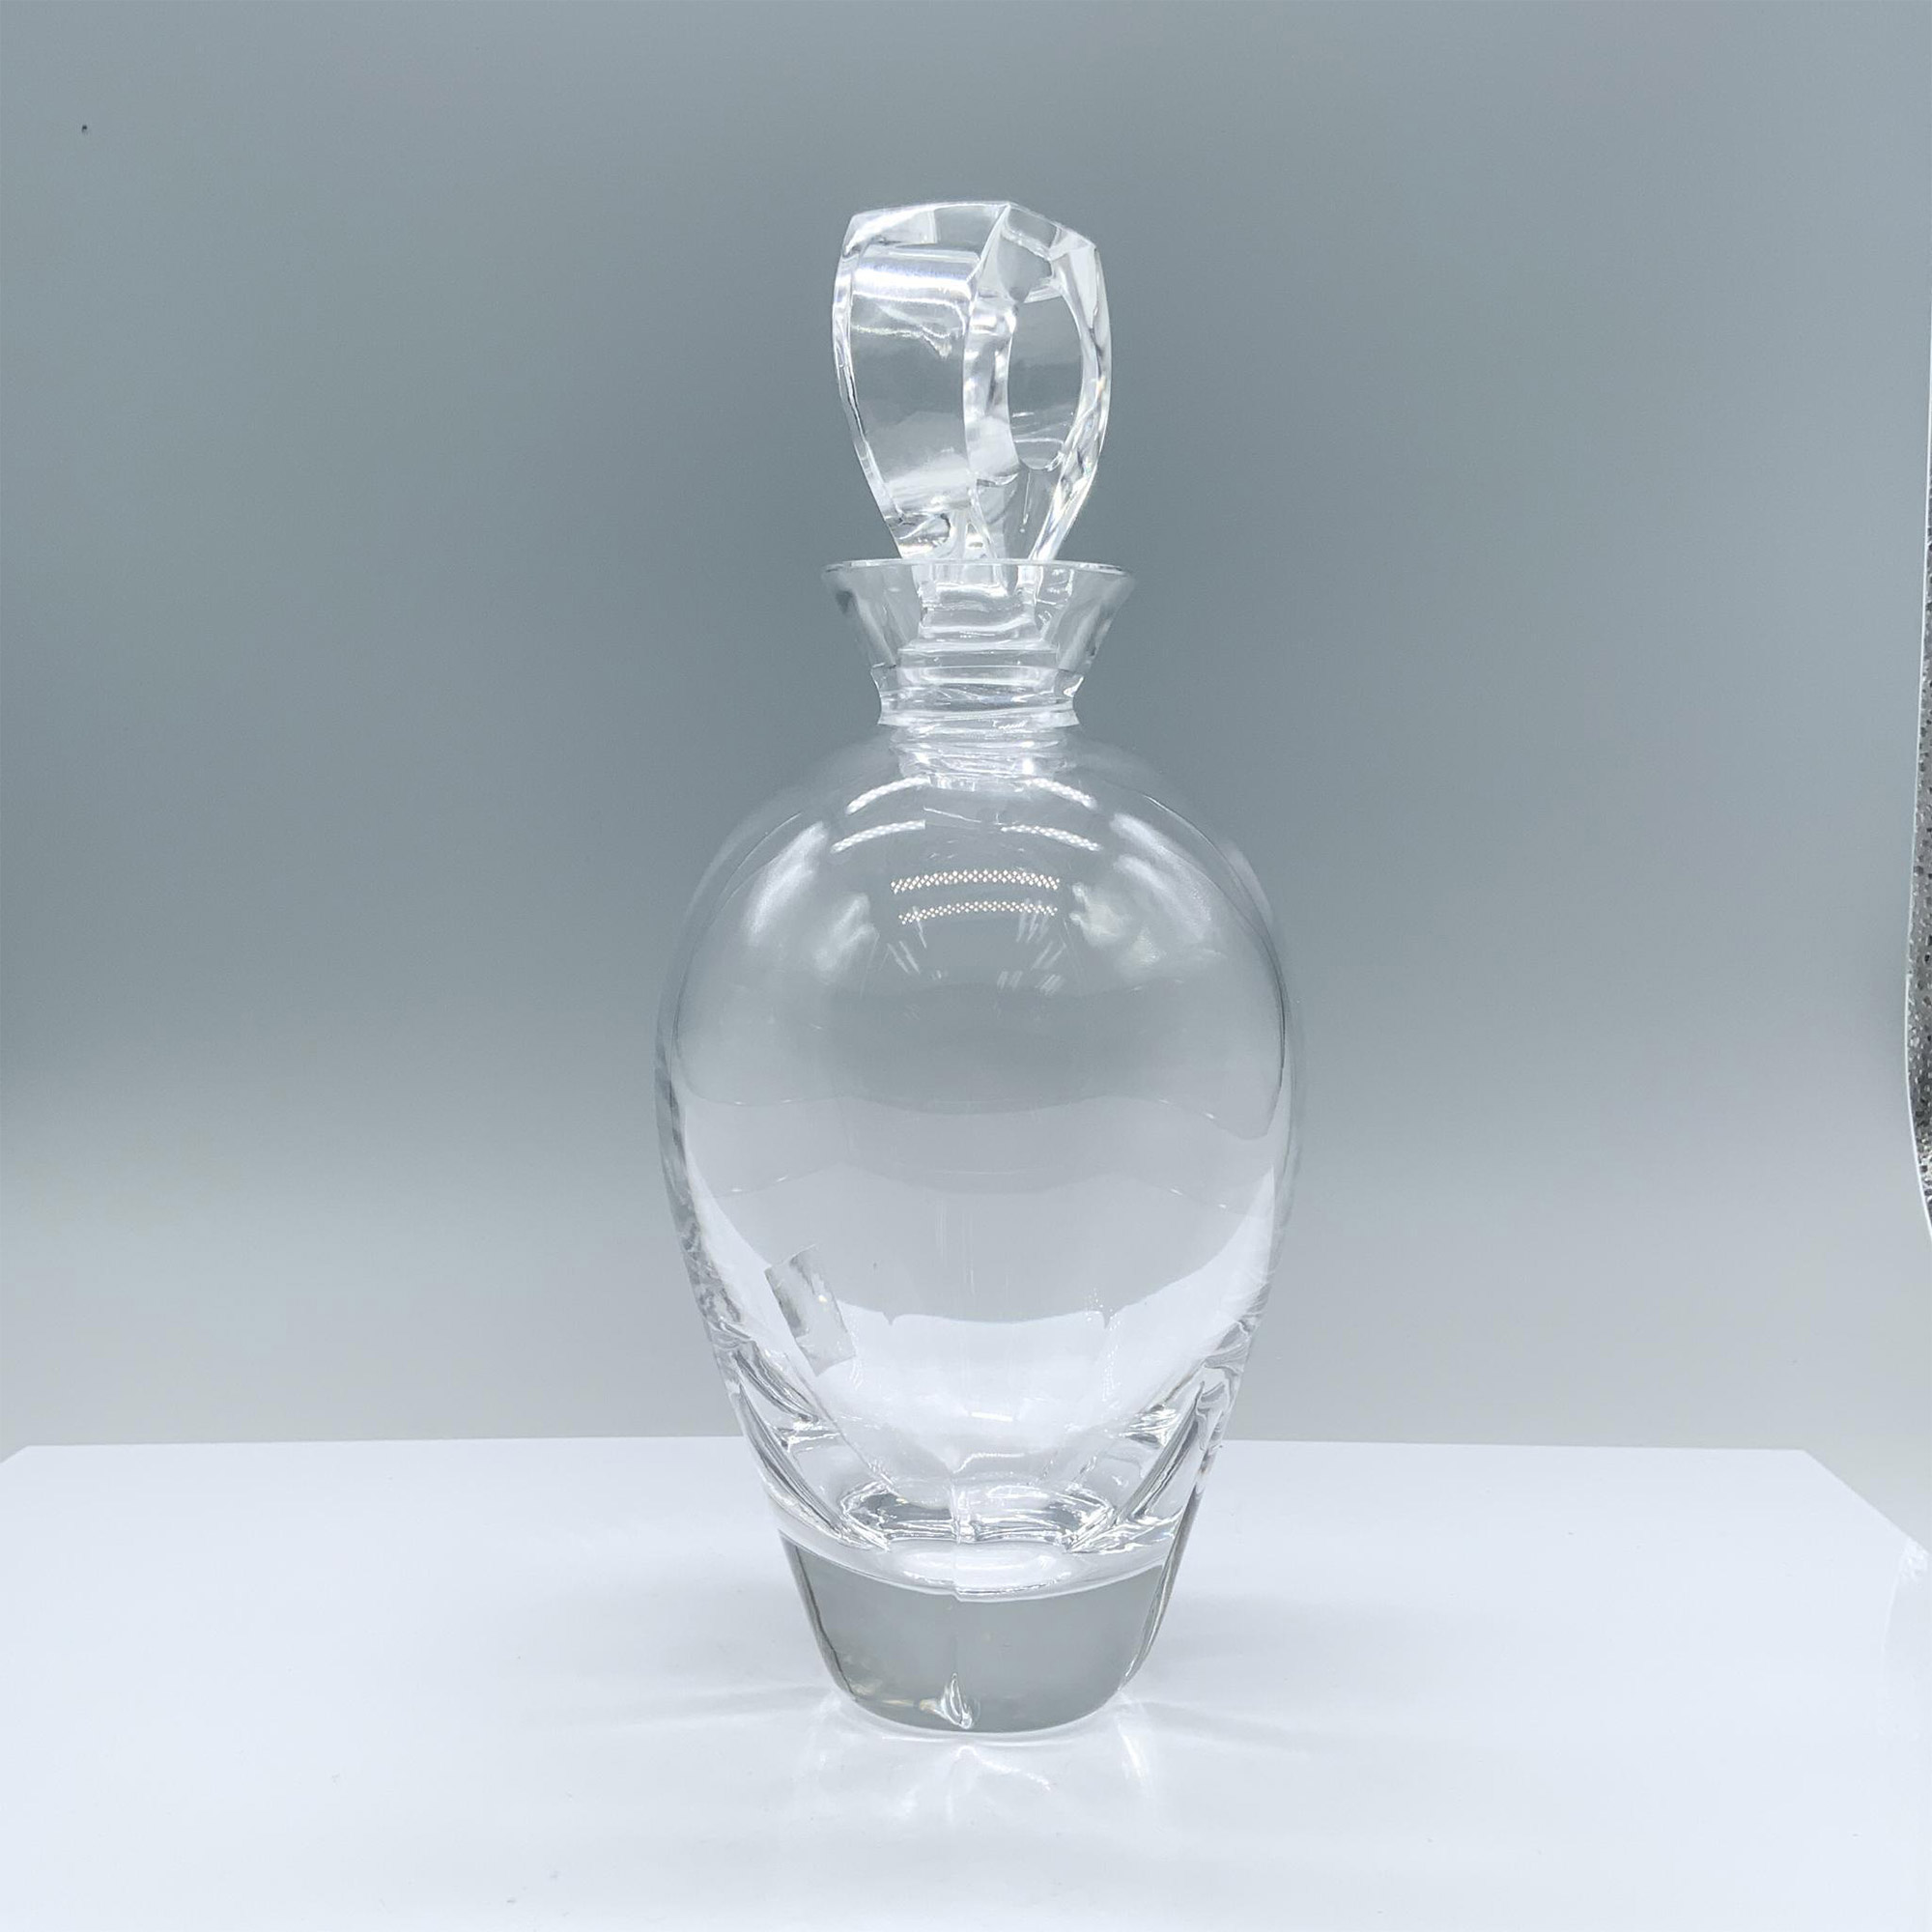 Lalique Highlands Crystal Decanter with Stopper - Image 3 of 4